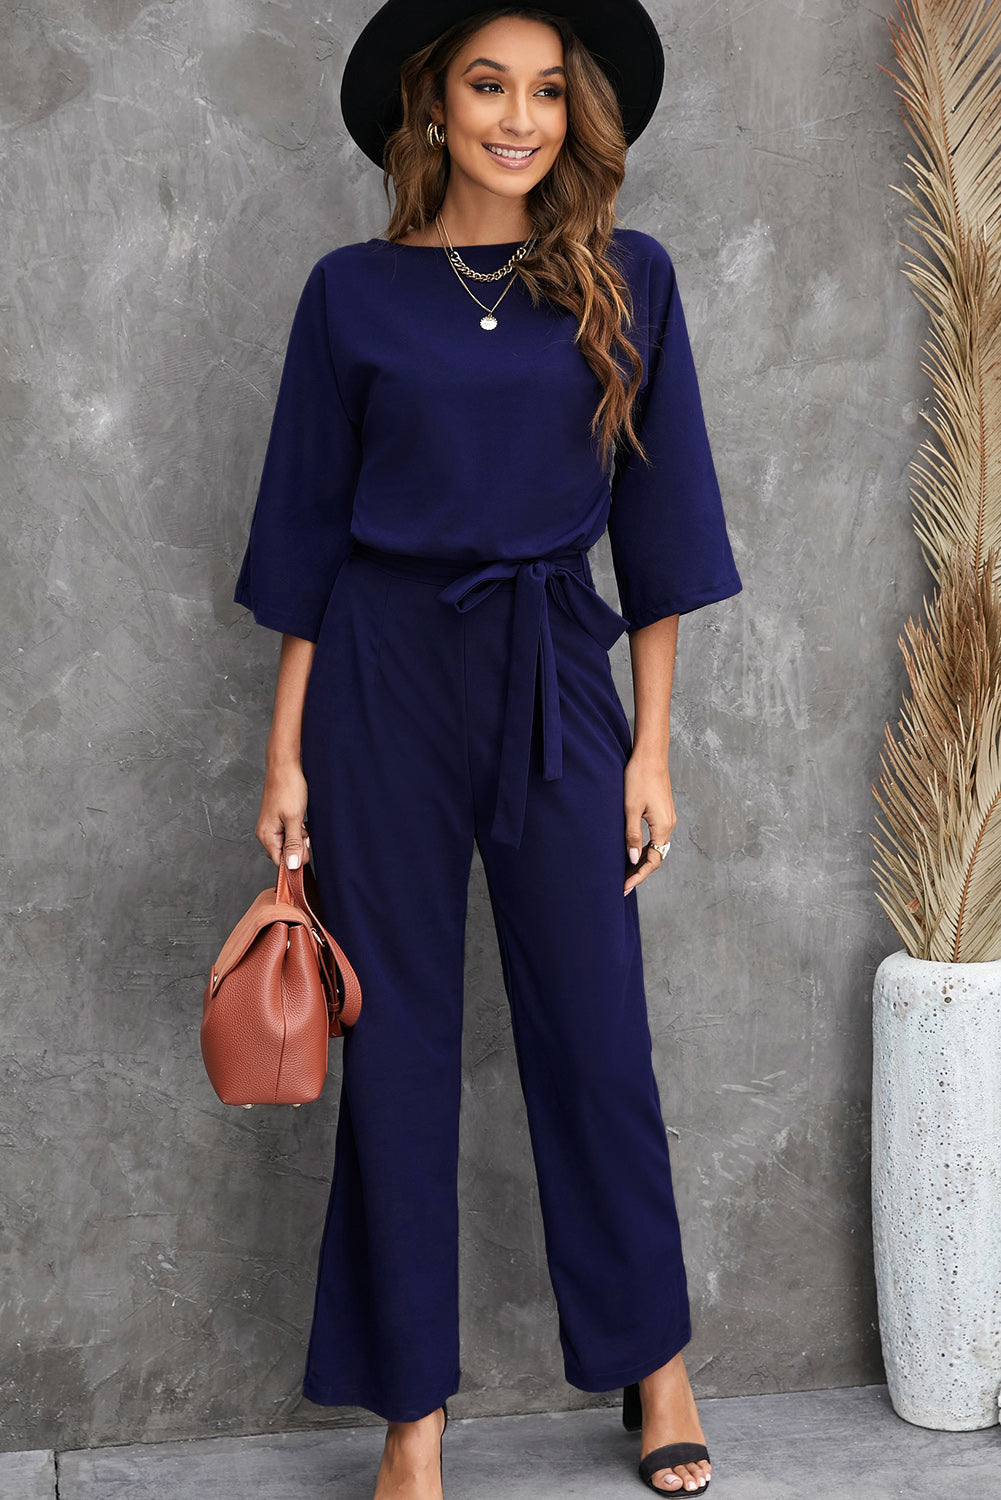 Shop Our Belted Three-Quarter Sleeve Jumpsuit | Chic And Stylish